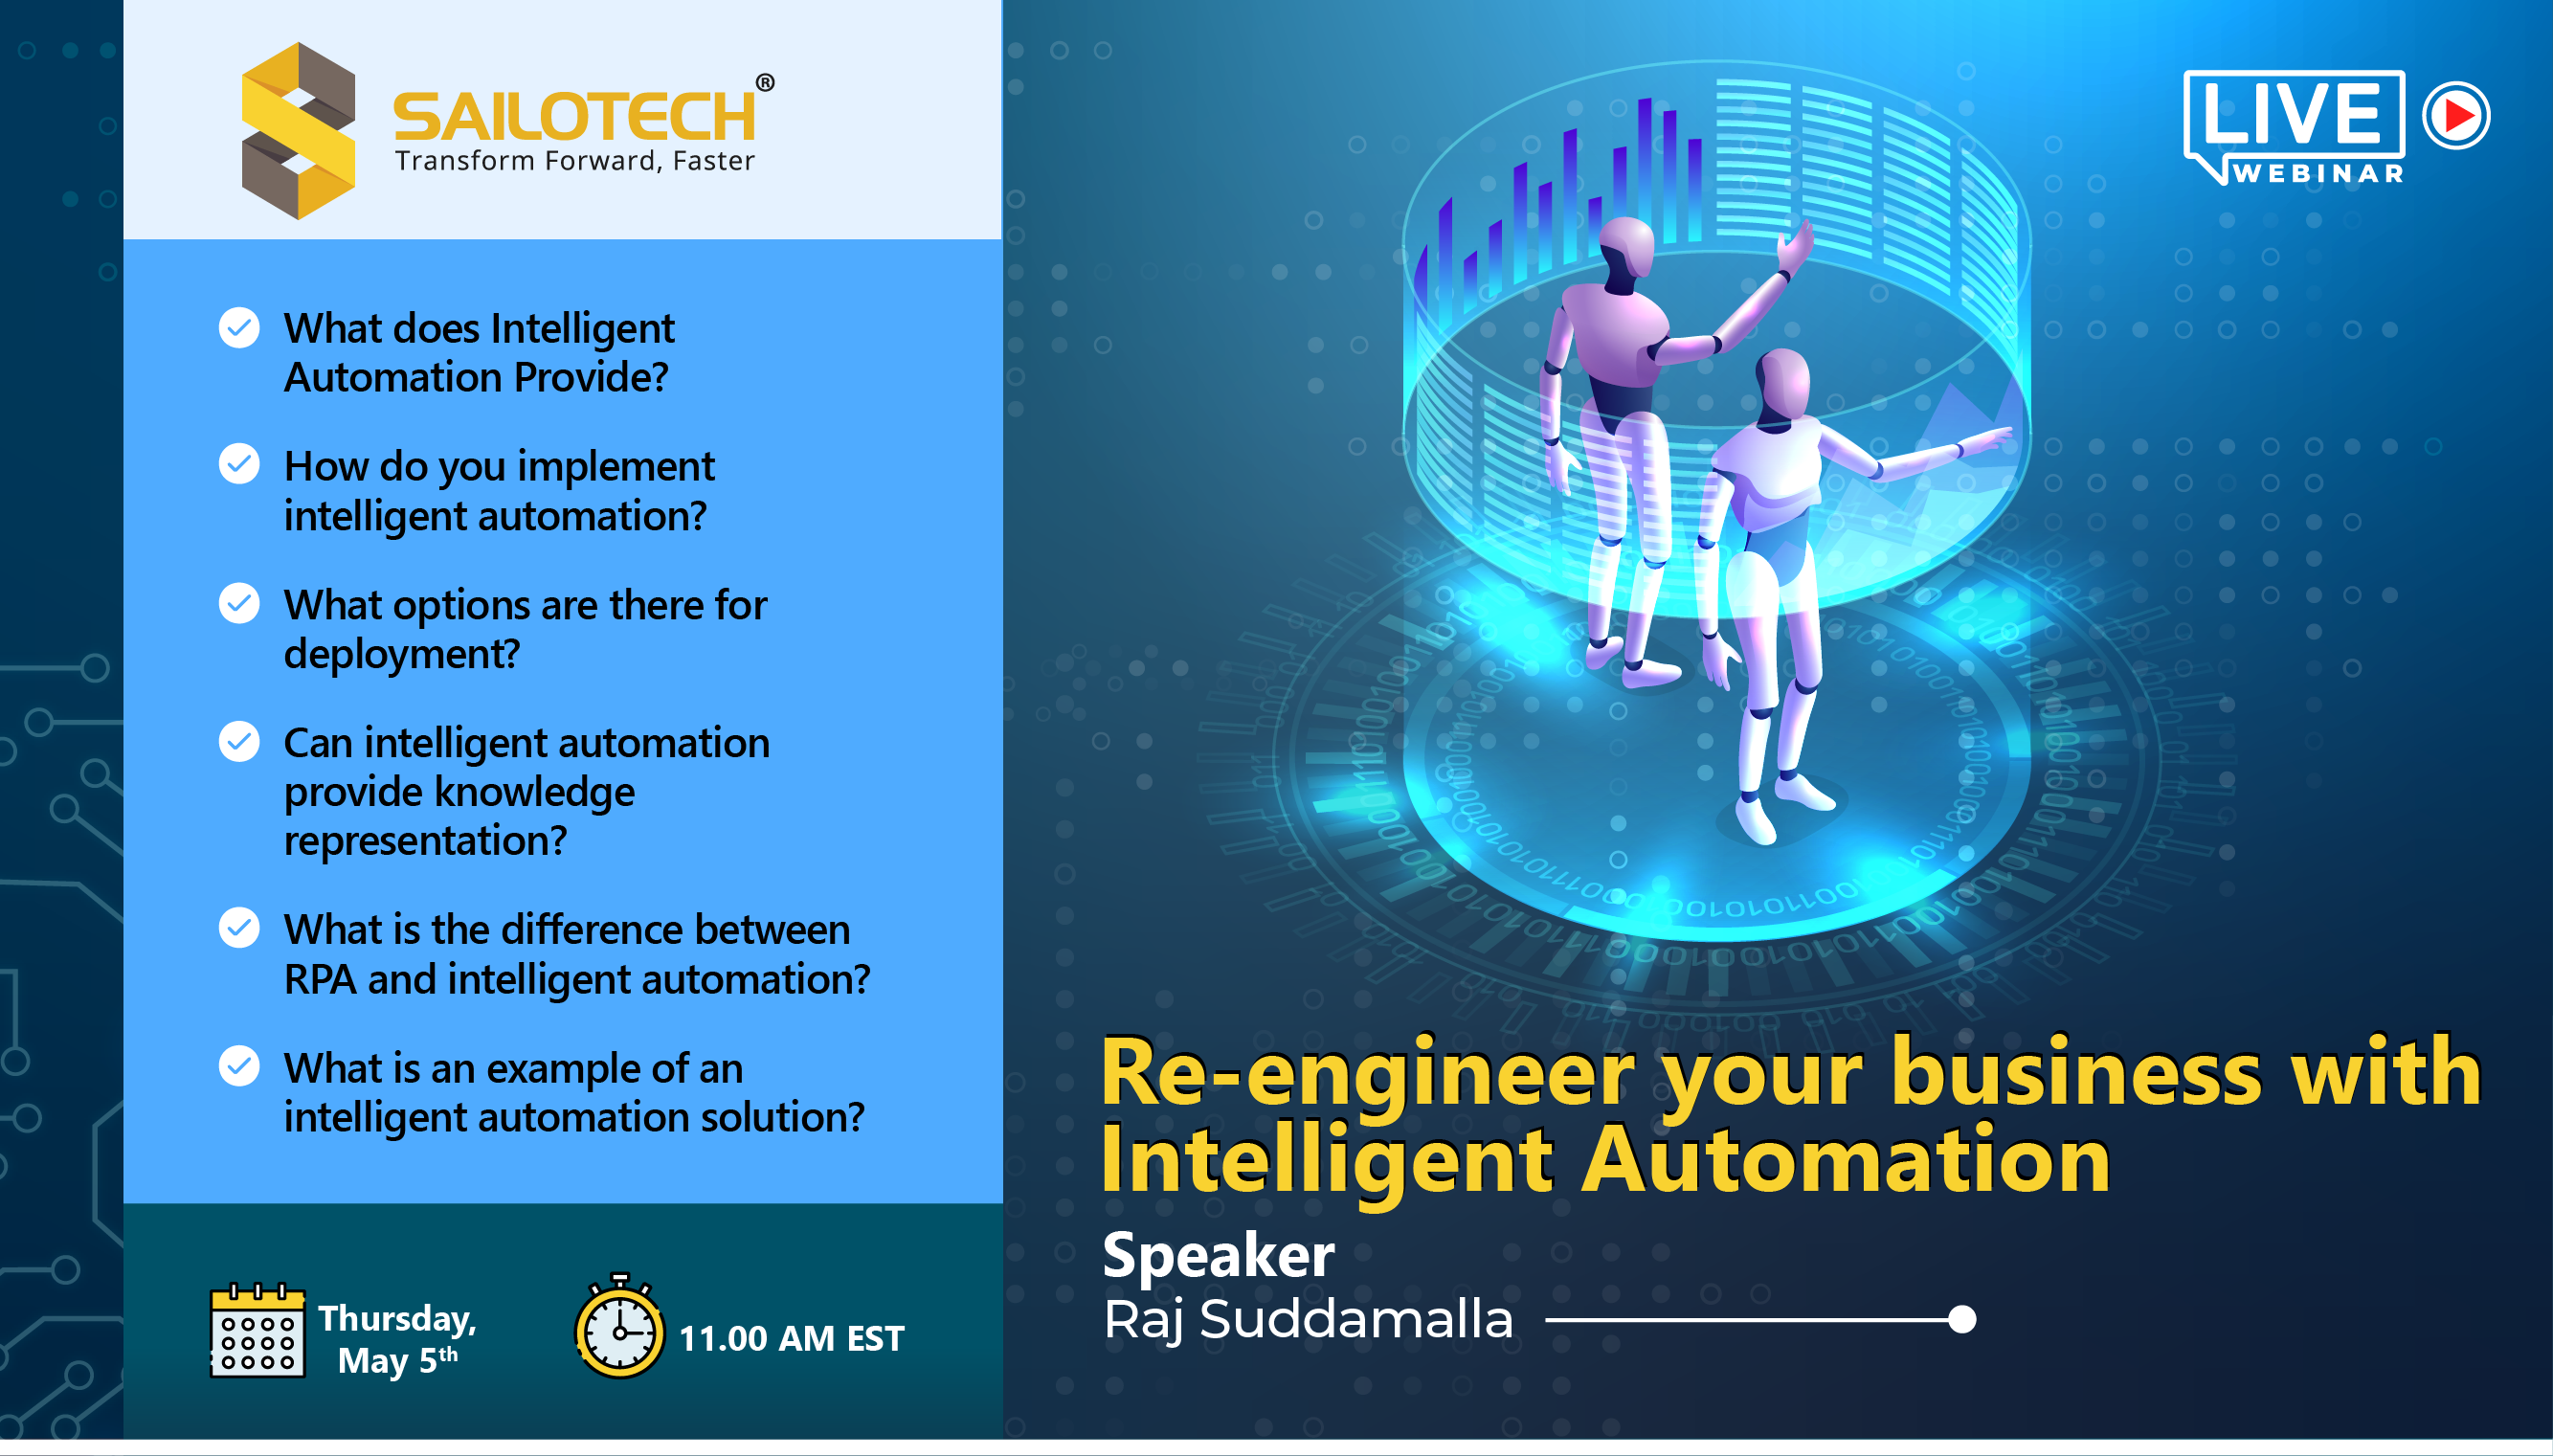 Re-engineer your business with Intelligent Automation, Online Event